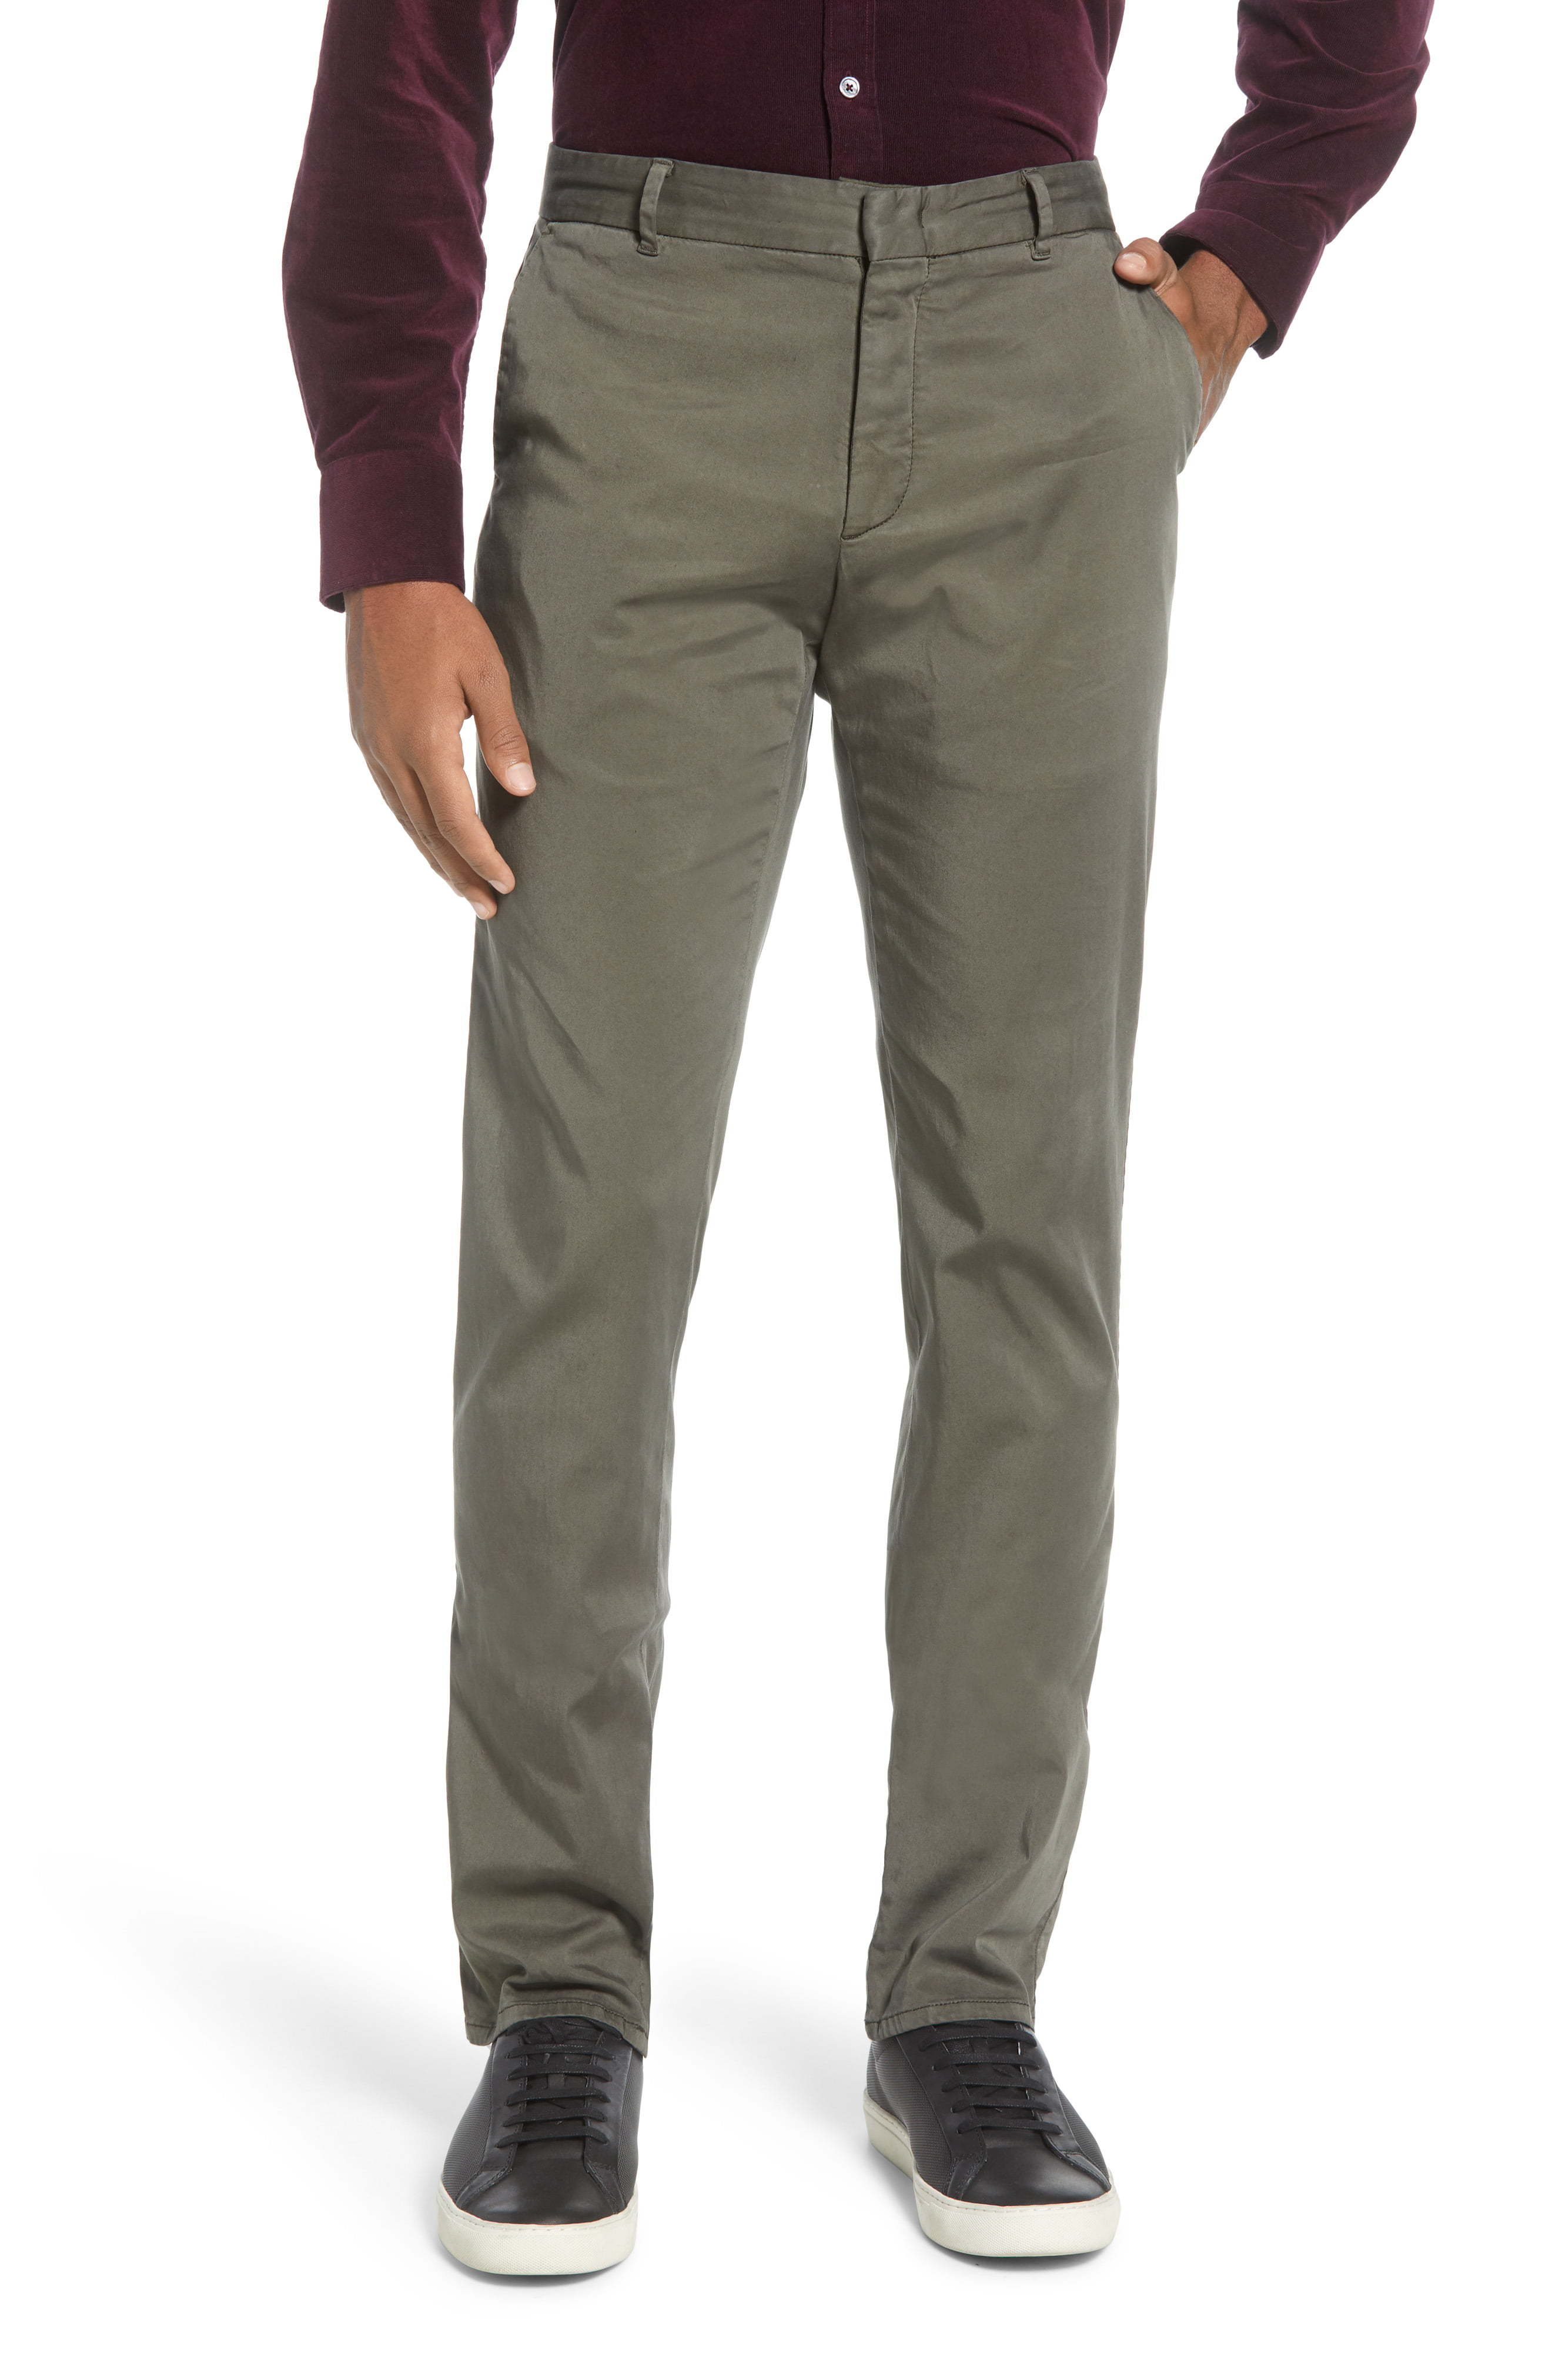 Zachary Prell Aster Straight Fit Pants, $69 | Nordstrom | Lookastic.com